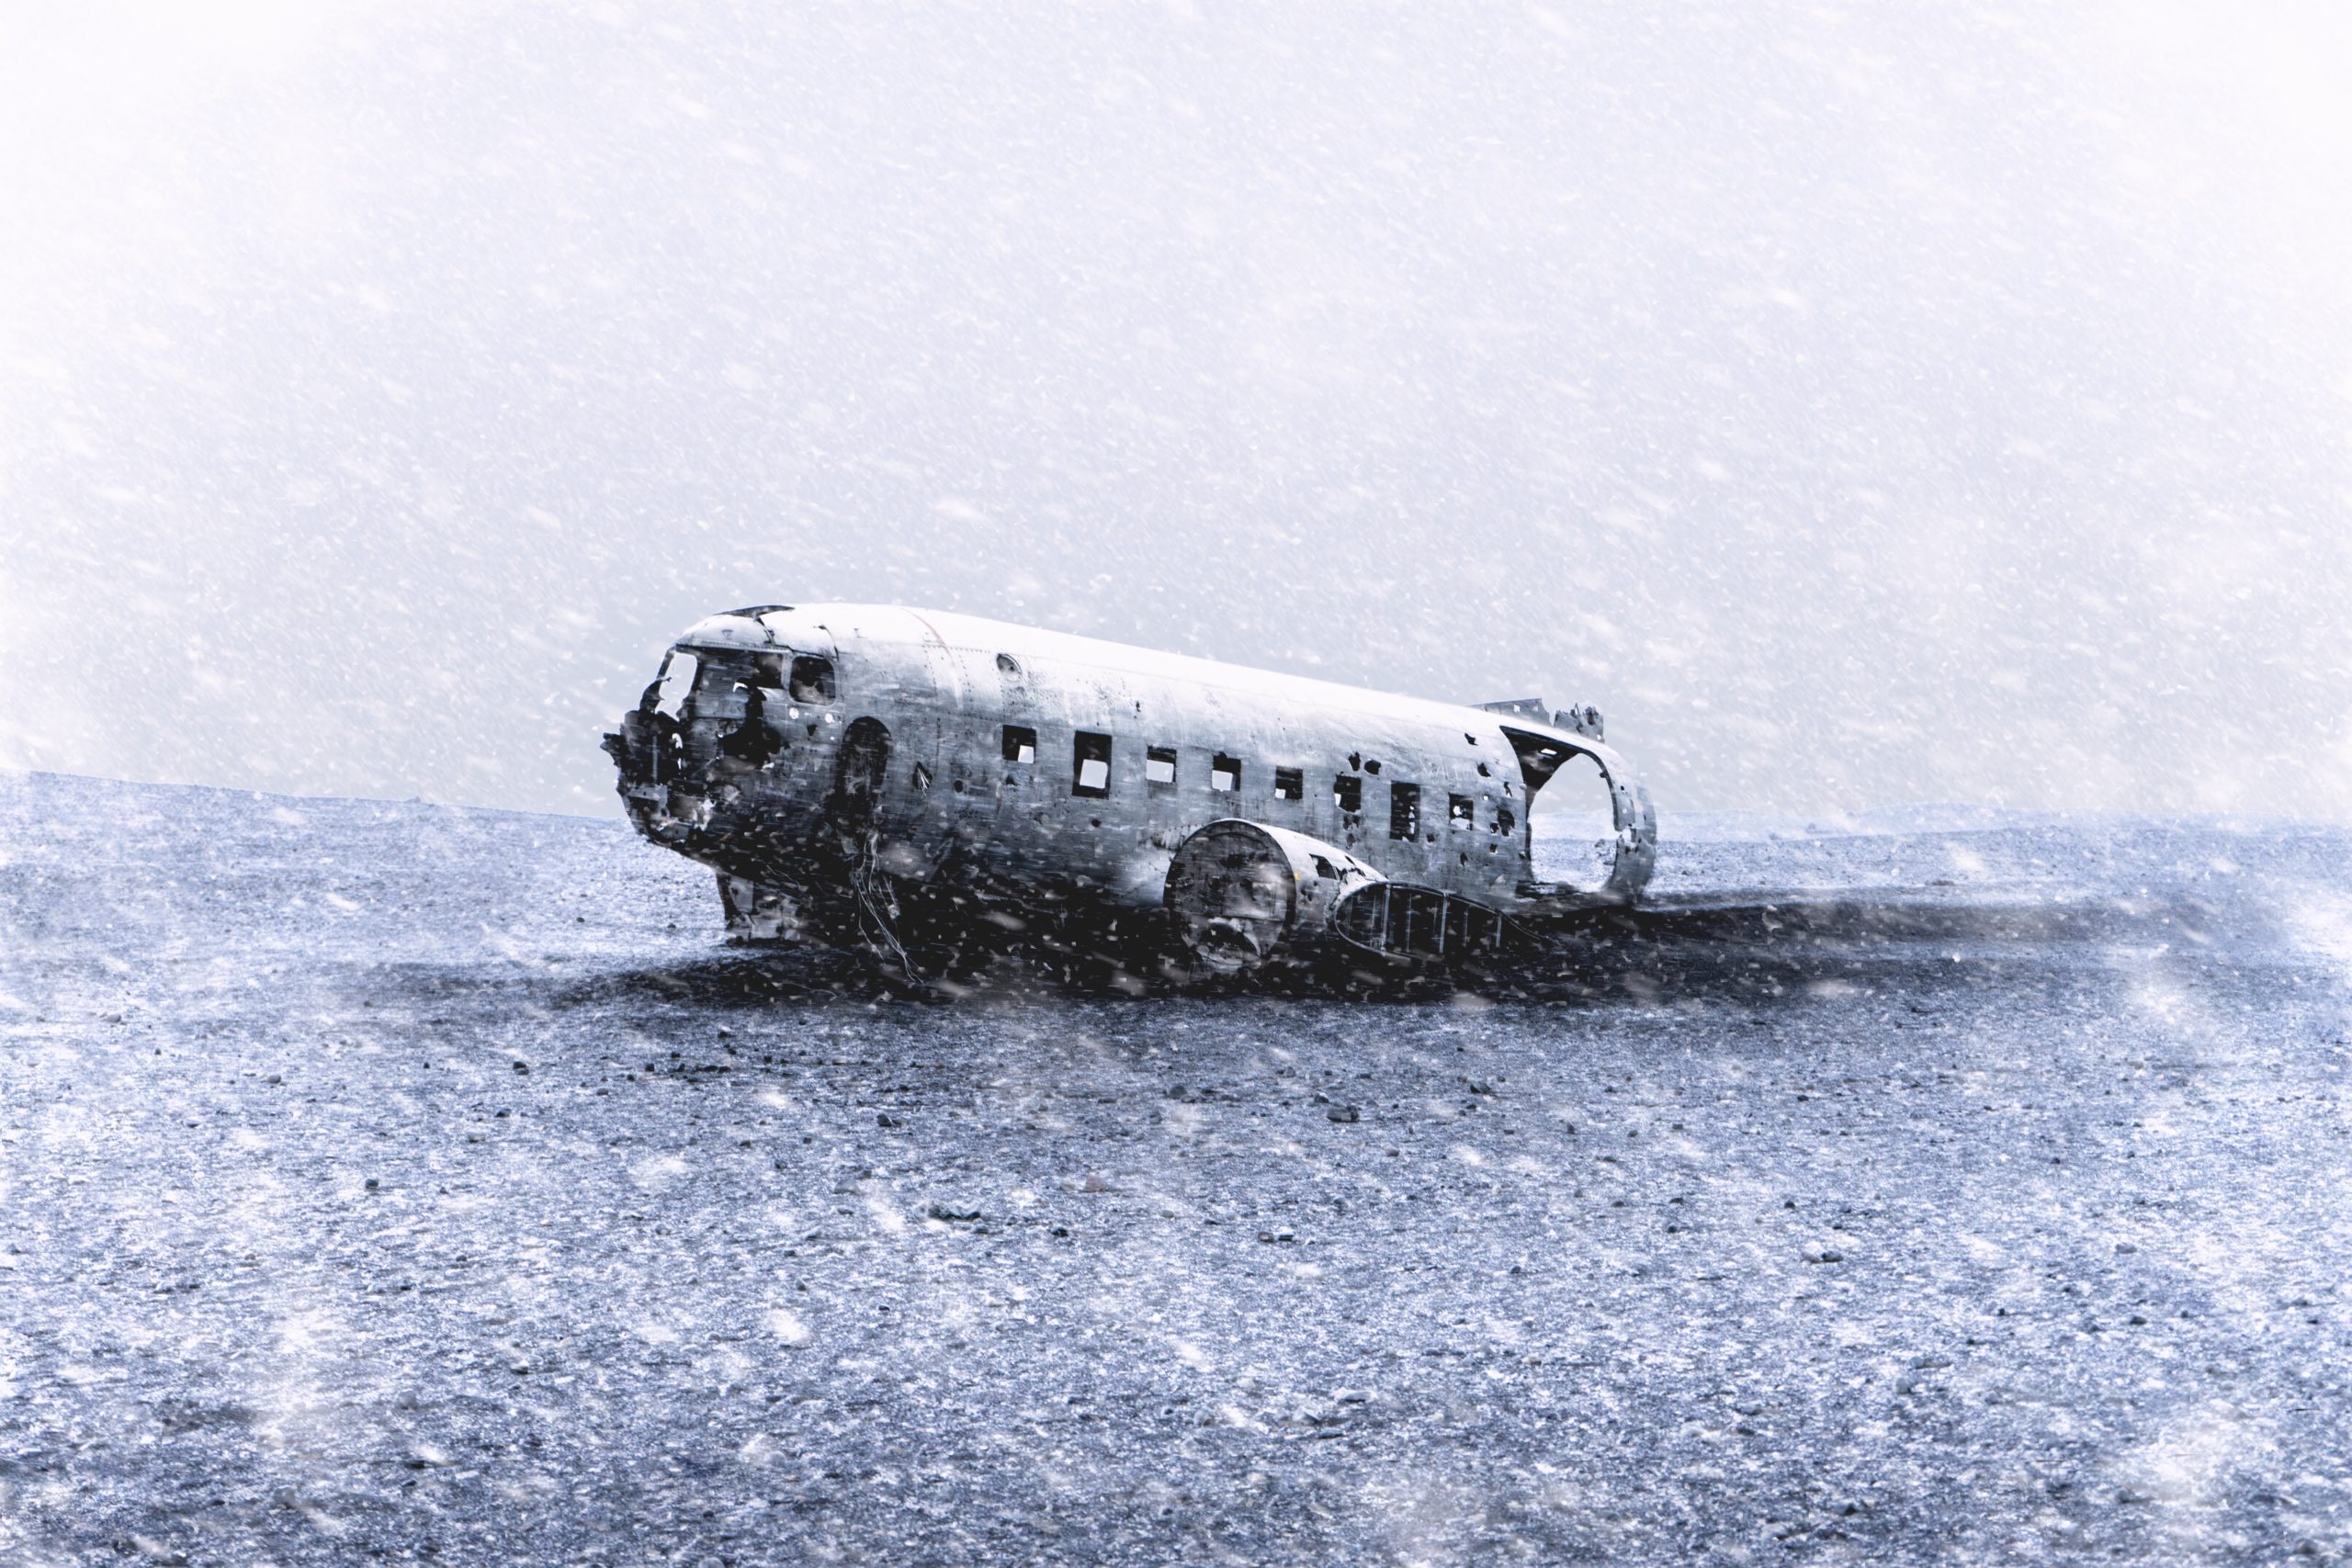 A blizzard overcomes the Iceland plane wreck